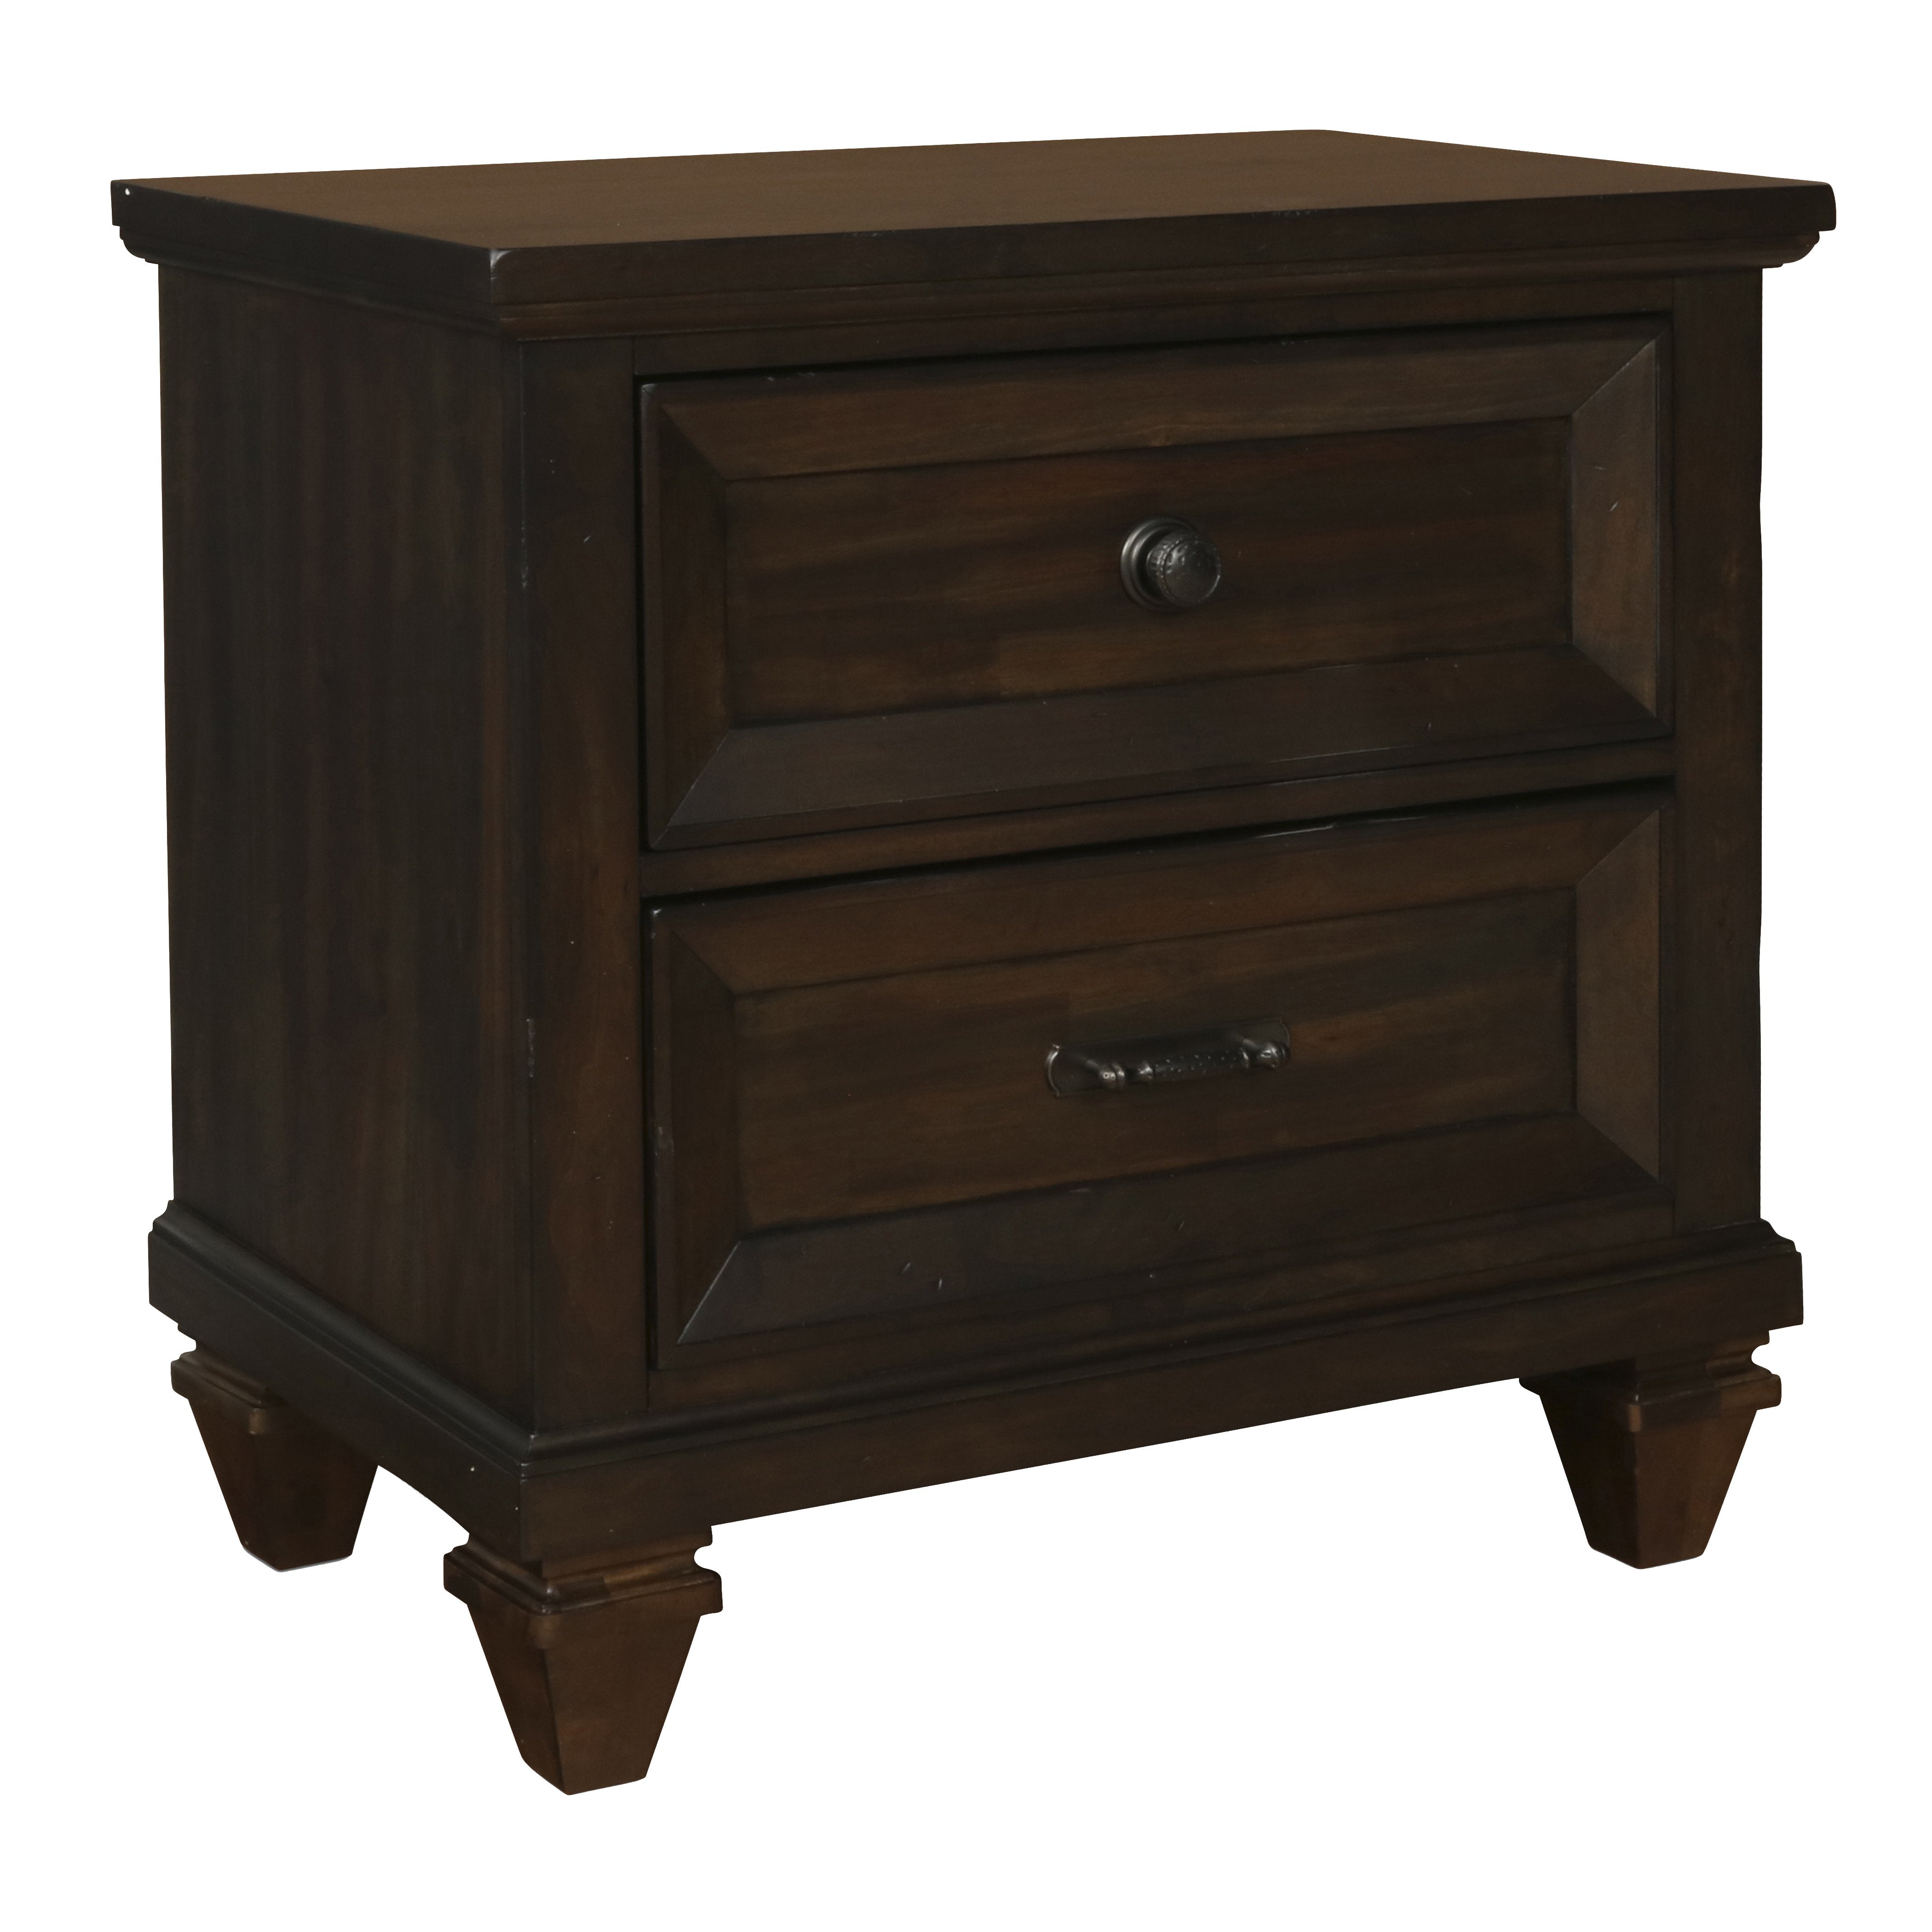 Benzara BM223267 2 Drawer Wooden Nightstand with Metal Knob and Handle